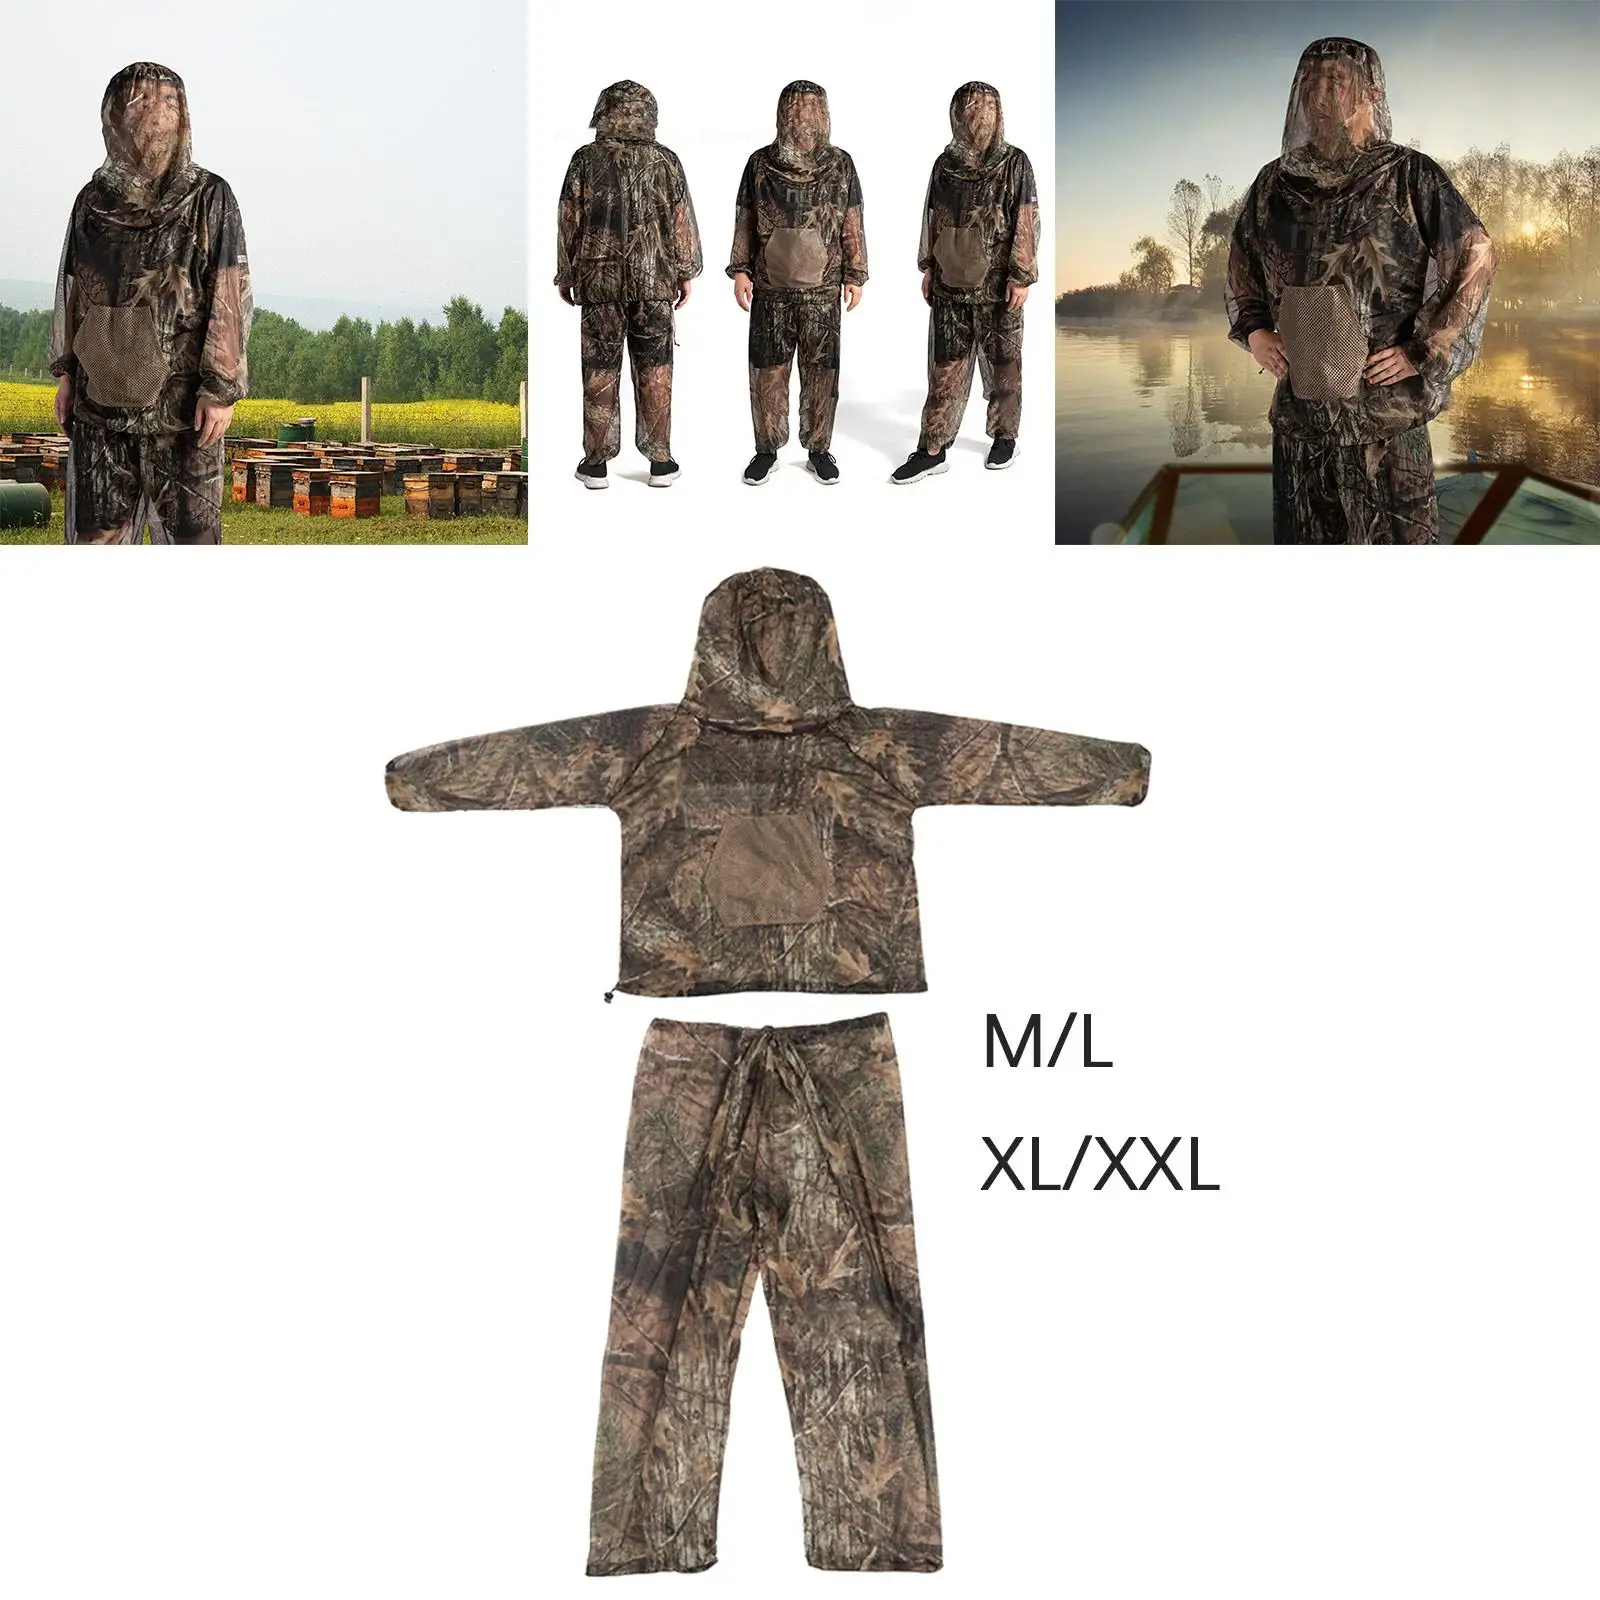 Lightweight Anti Breathable Mesh ed Full Protection Coveralls